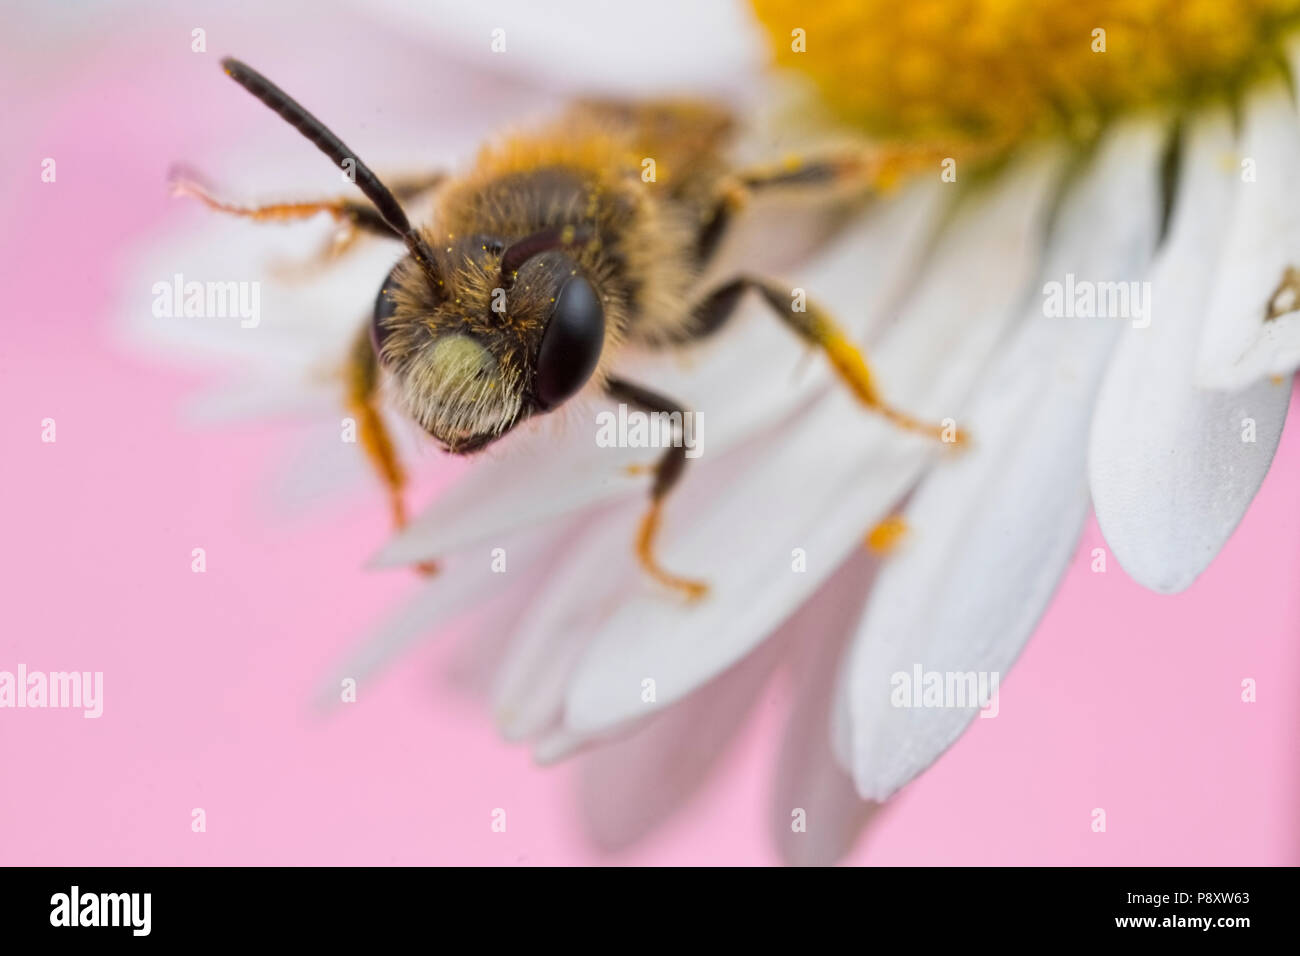 Bee balancing on the petals of a daisy Stock Photo